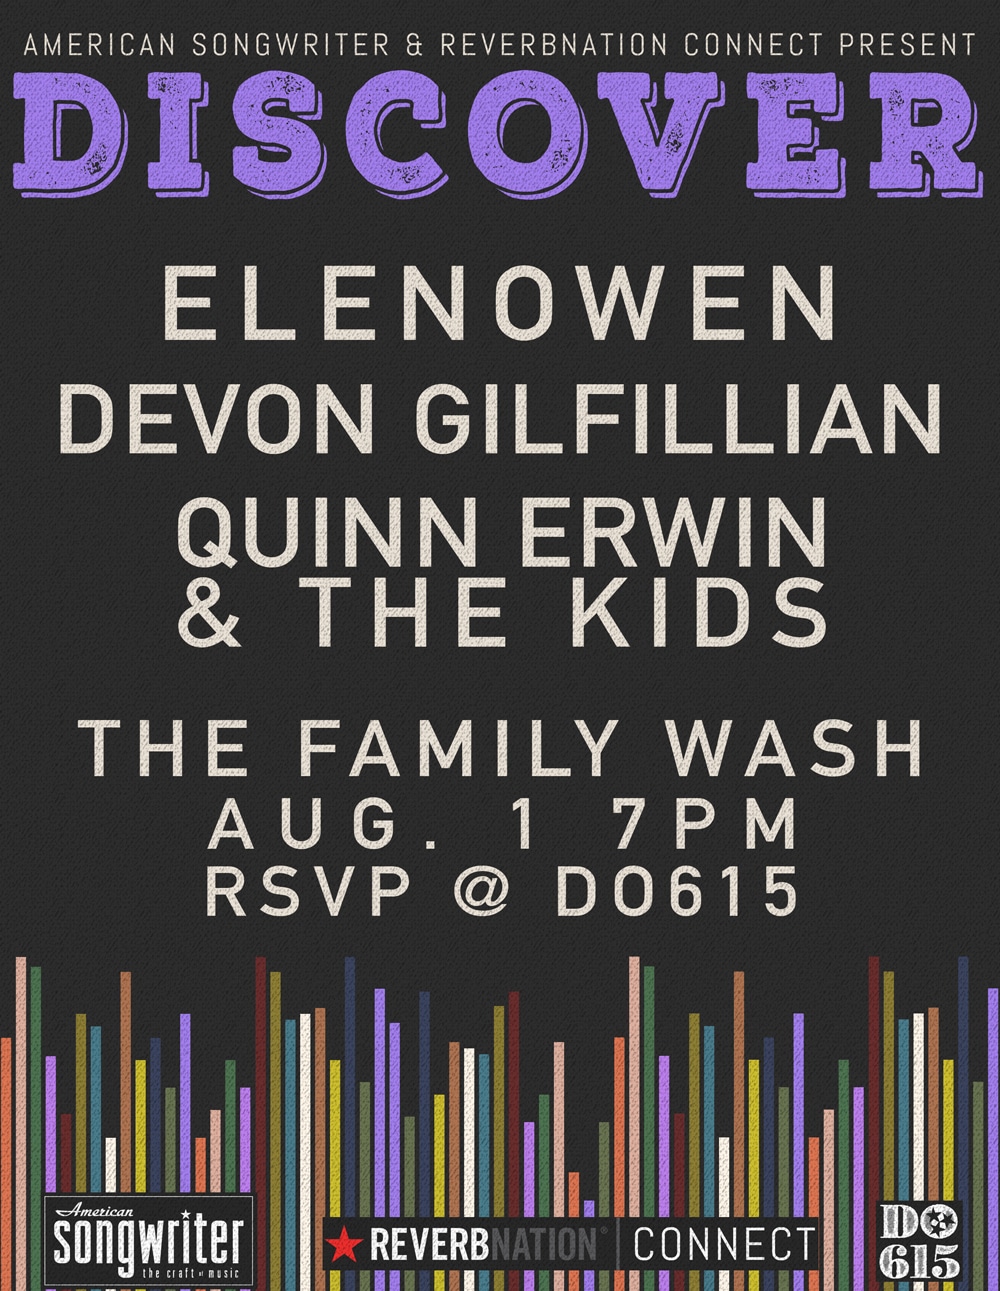 “Discover” Concert Series Continues August 1 with Elenowen, Devon Gilfillian and Quinn Erwin & The Kids